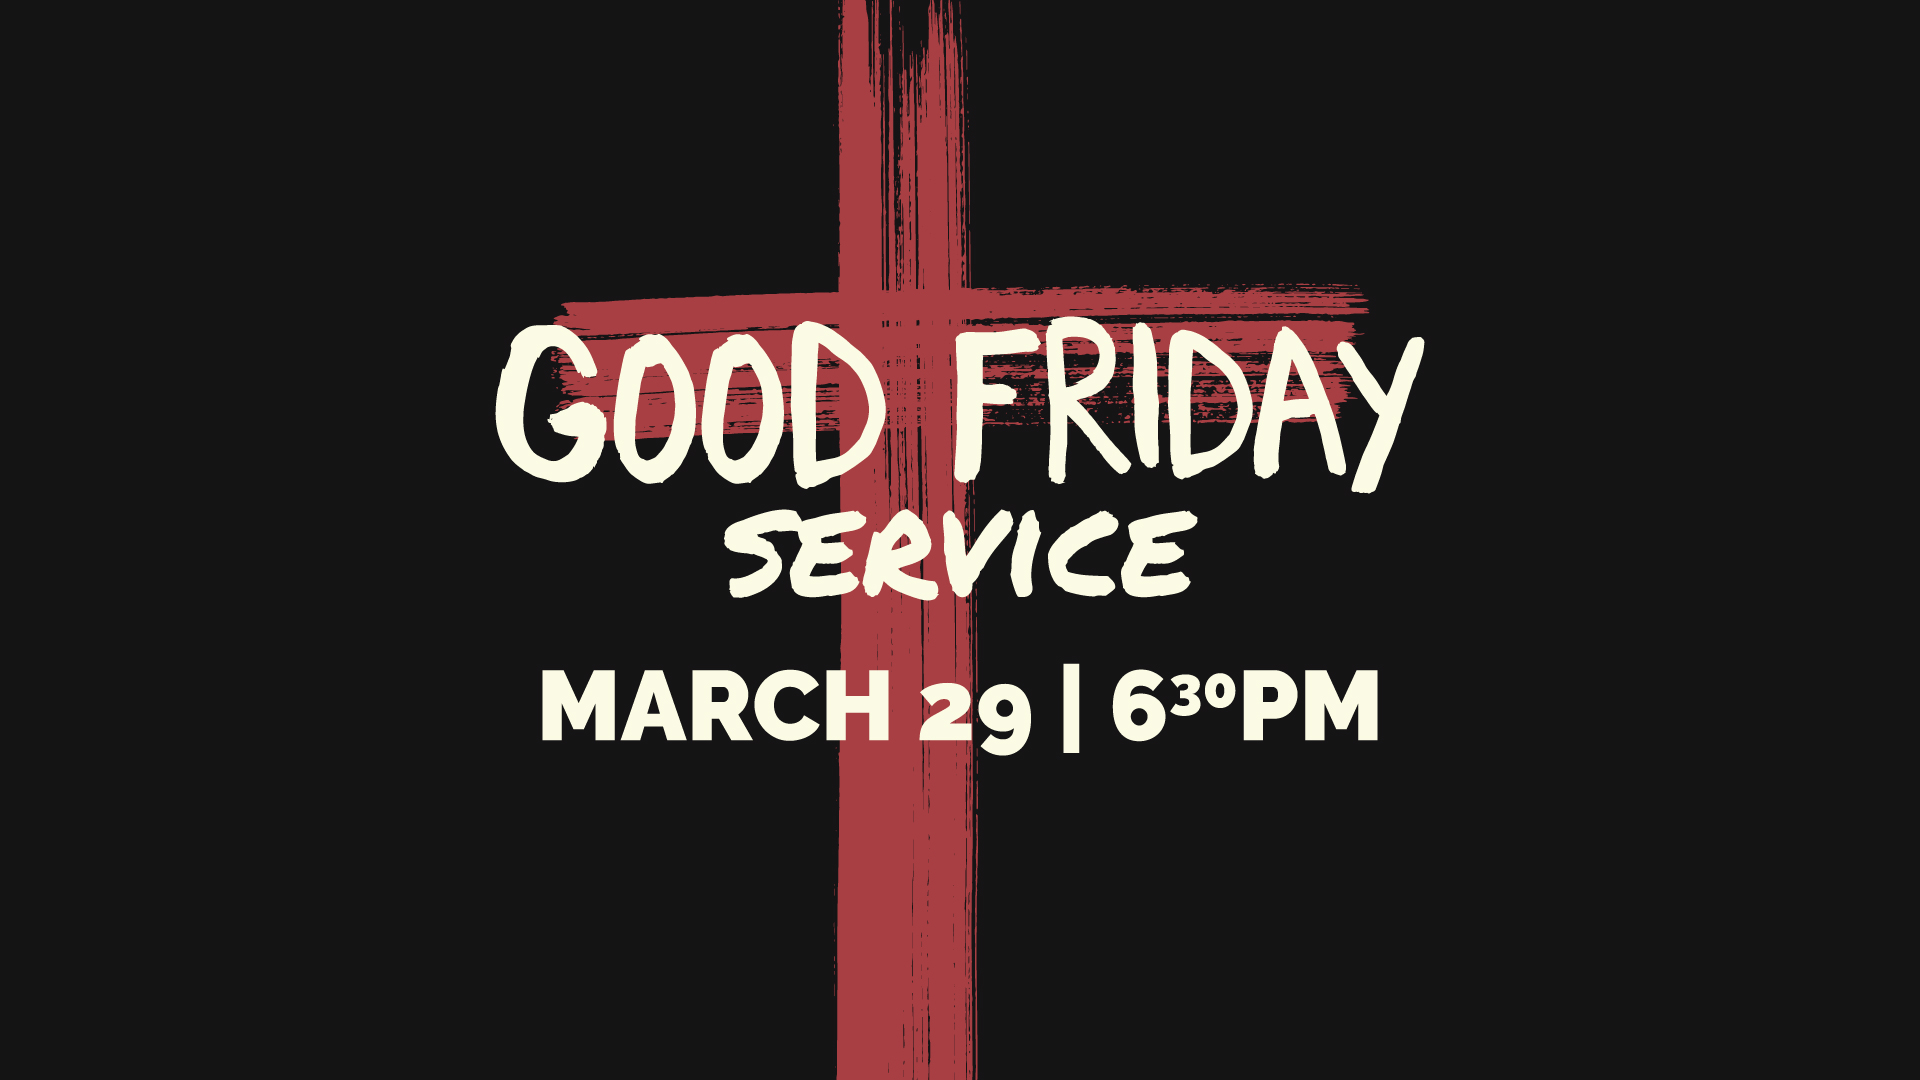 Good Friday Service | March 29 at 6:30pm